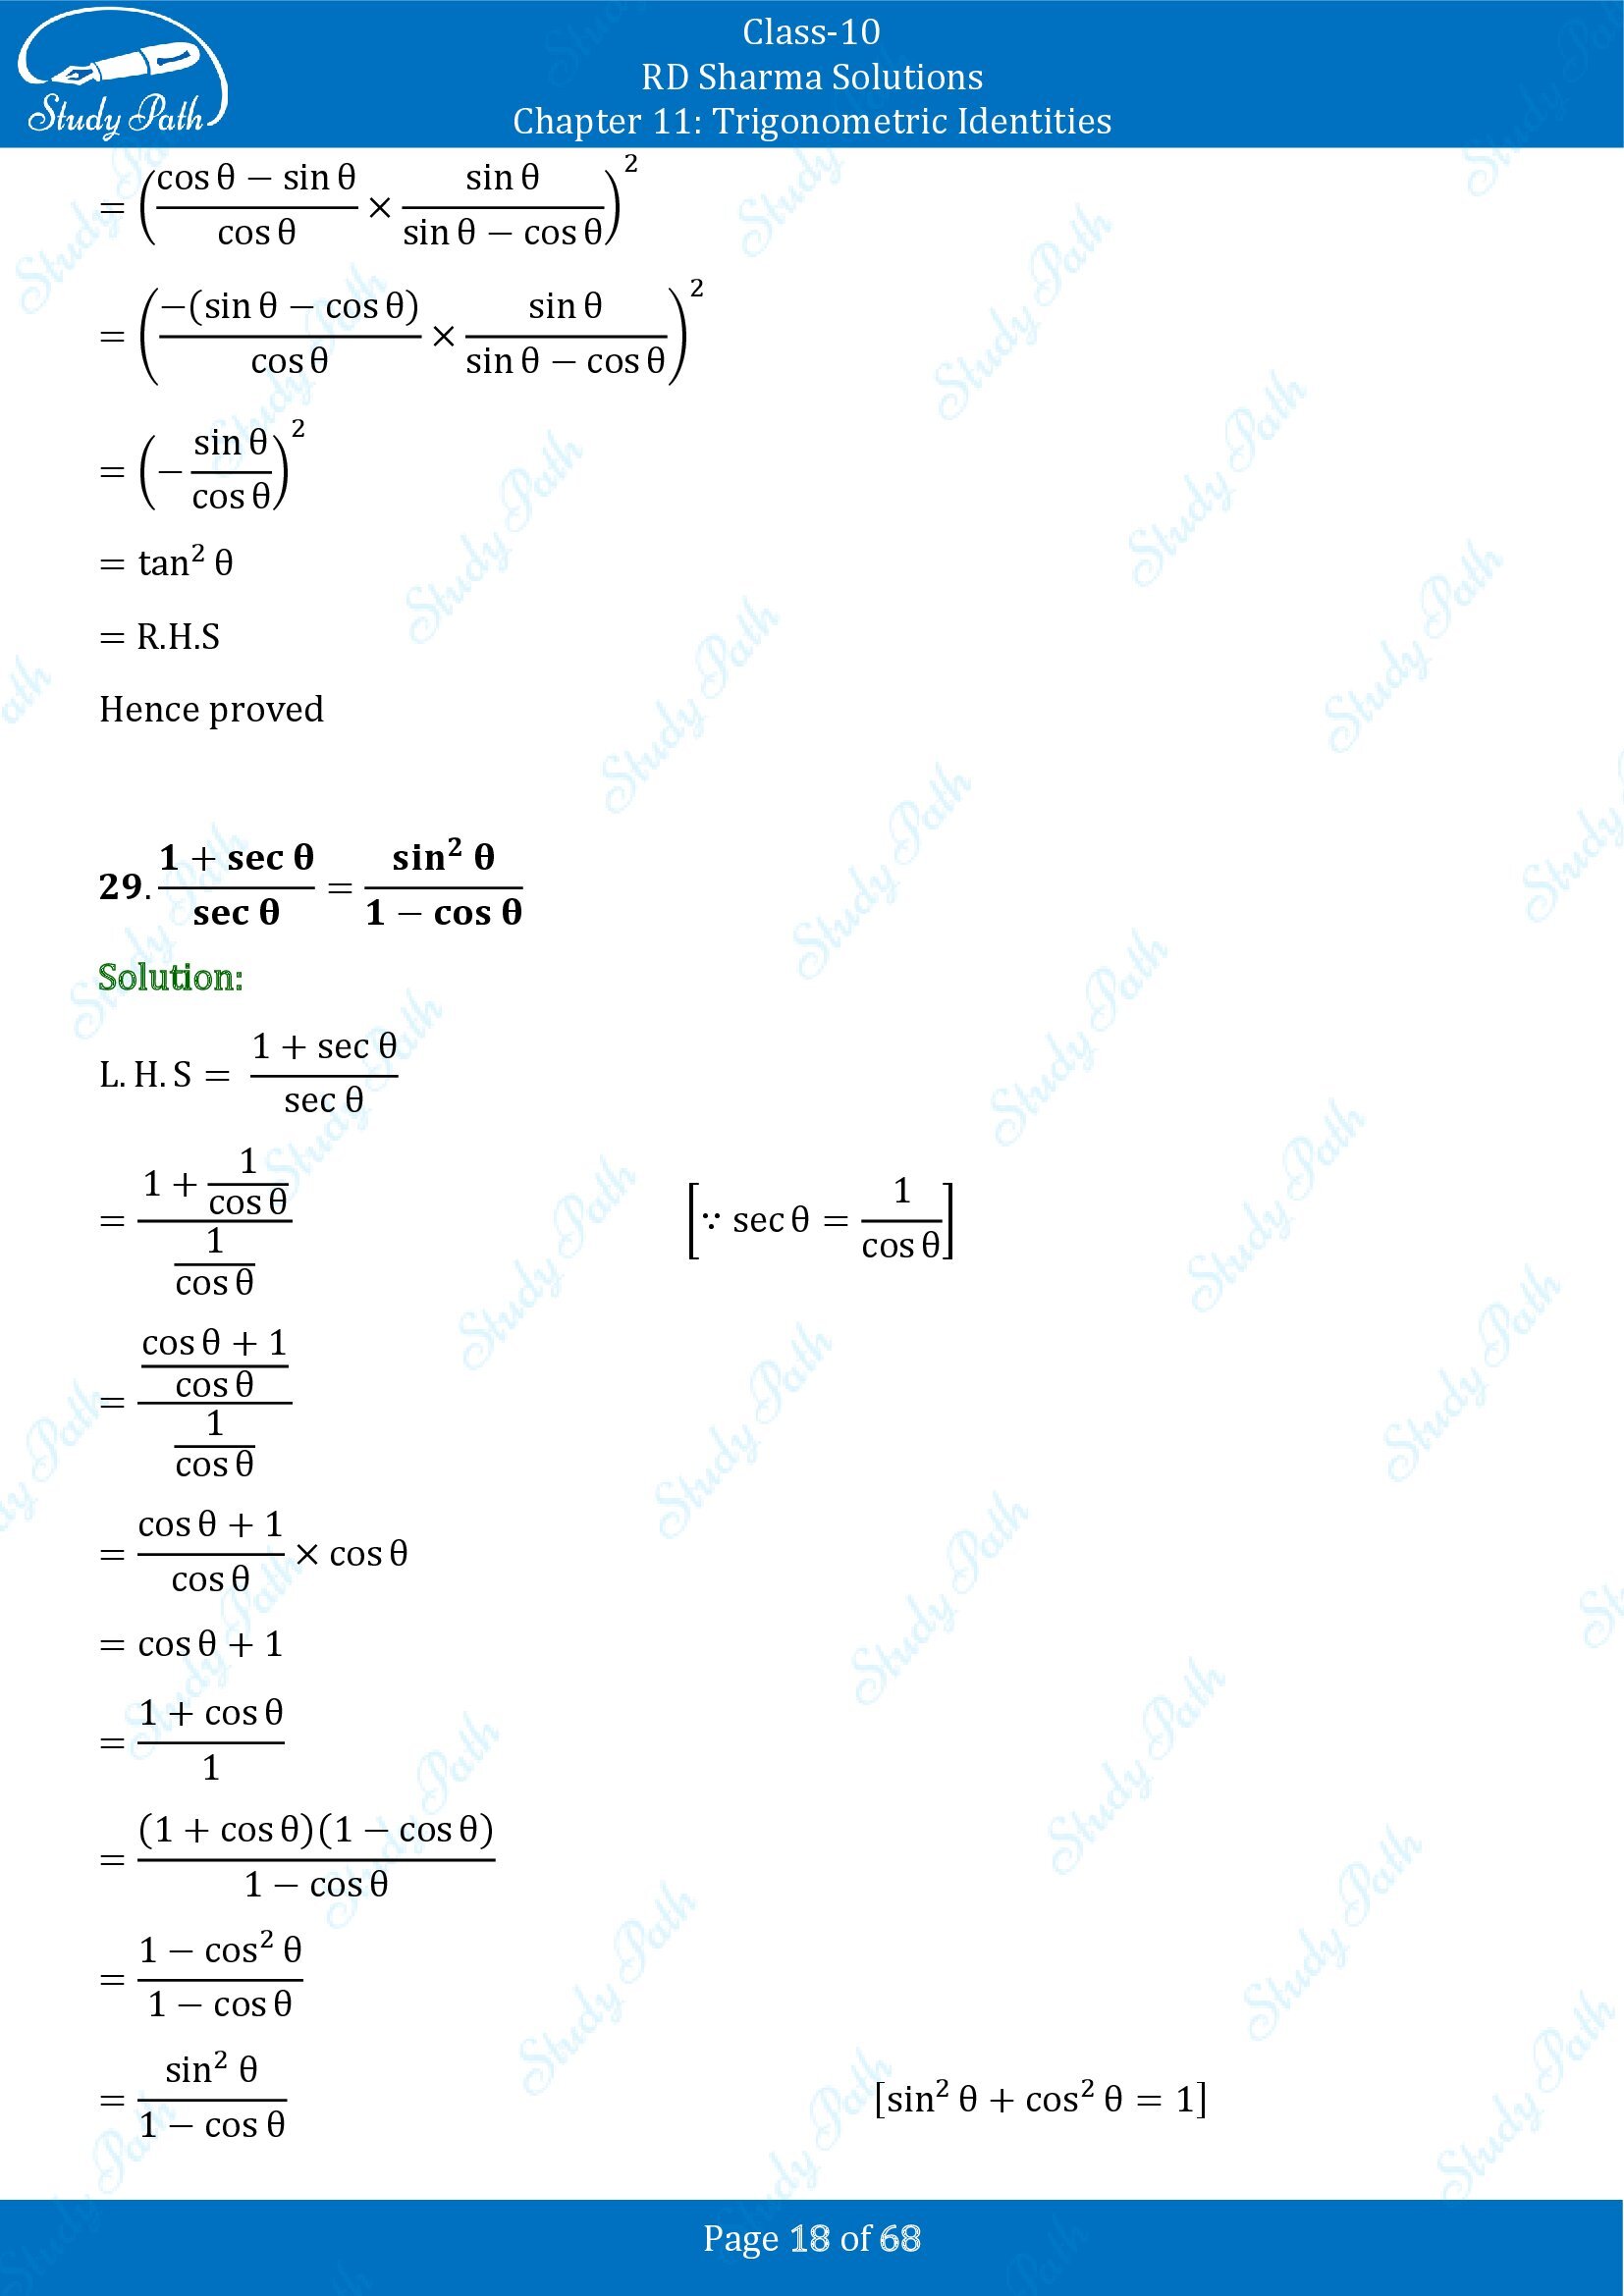 RD Sharma Solutions Class 10 Chapter 11 Trigonometric Identities Exercise 11.1 00018